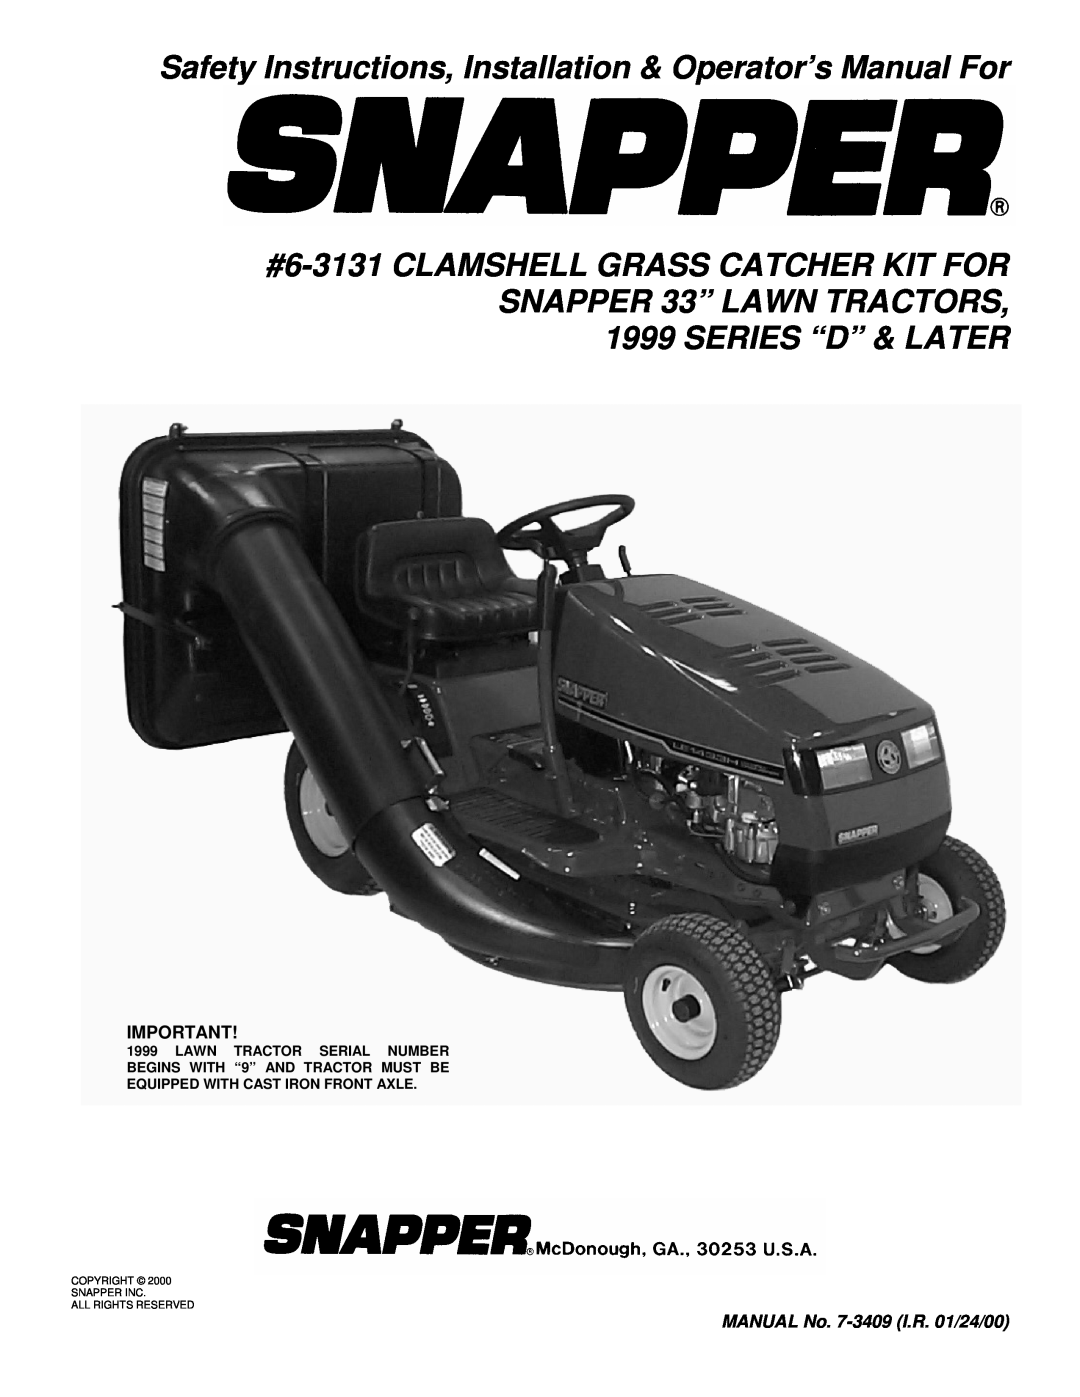 Snapper 6-3131 manual Safety Instructions, Installation & Operator’s Manual For, MANUAL No. 7-3409 I.R. 01/24/00 